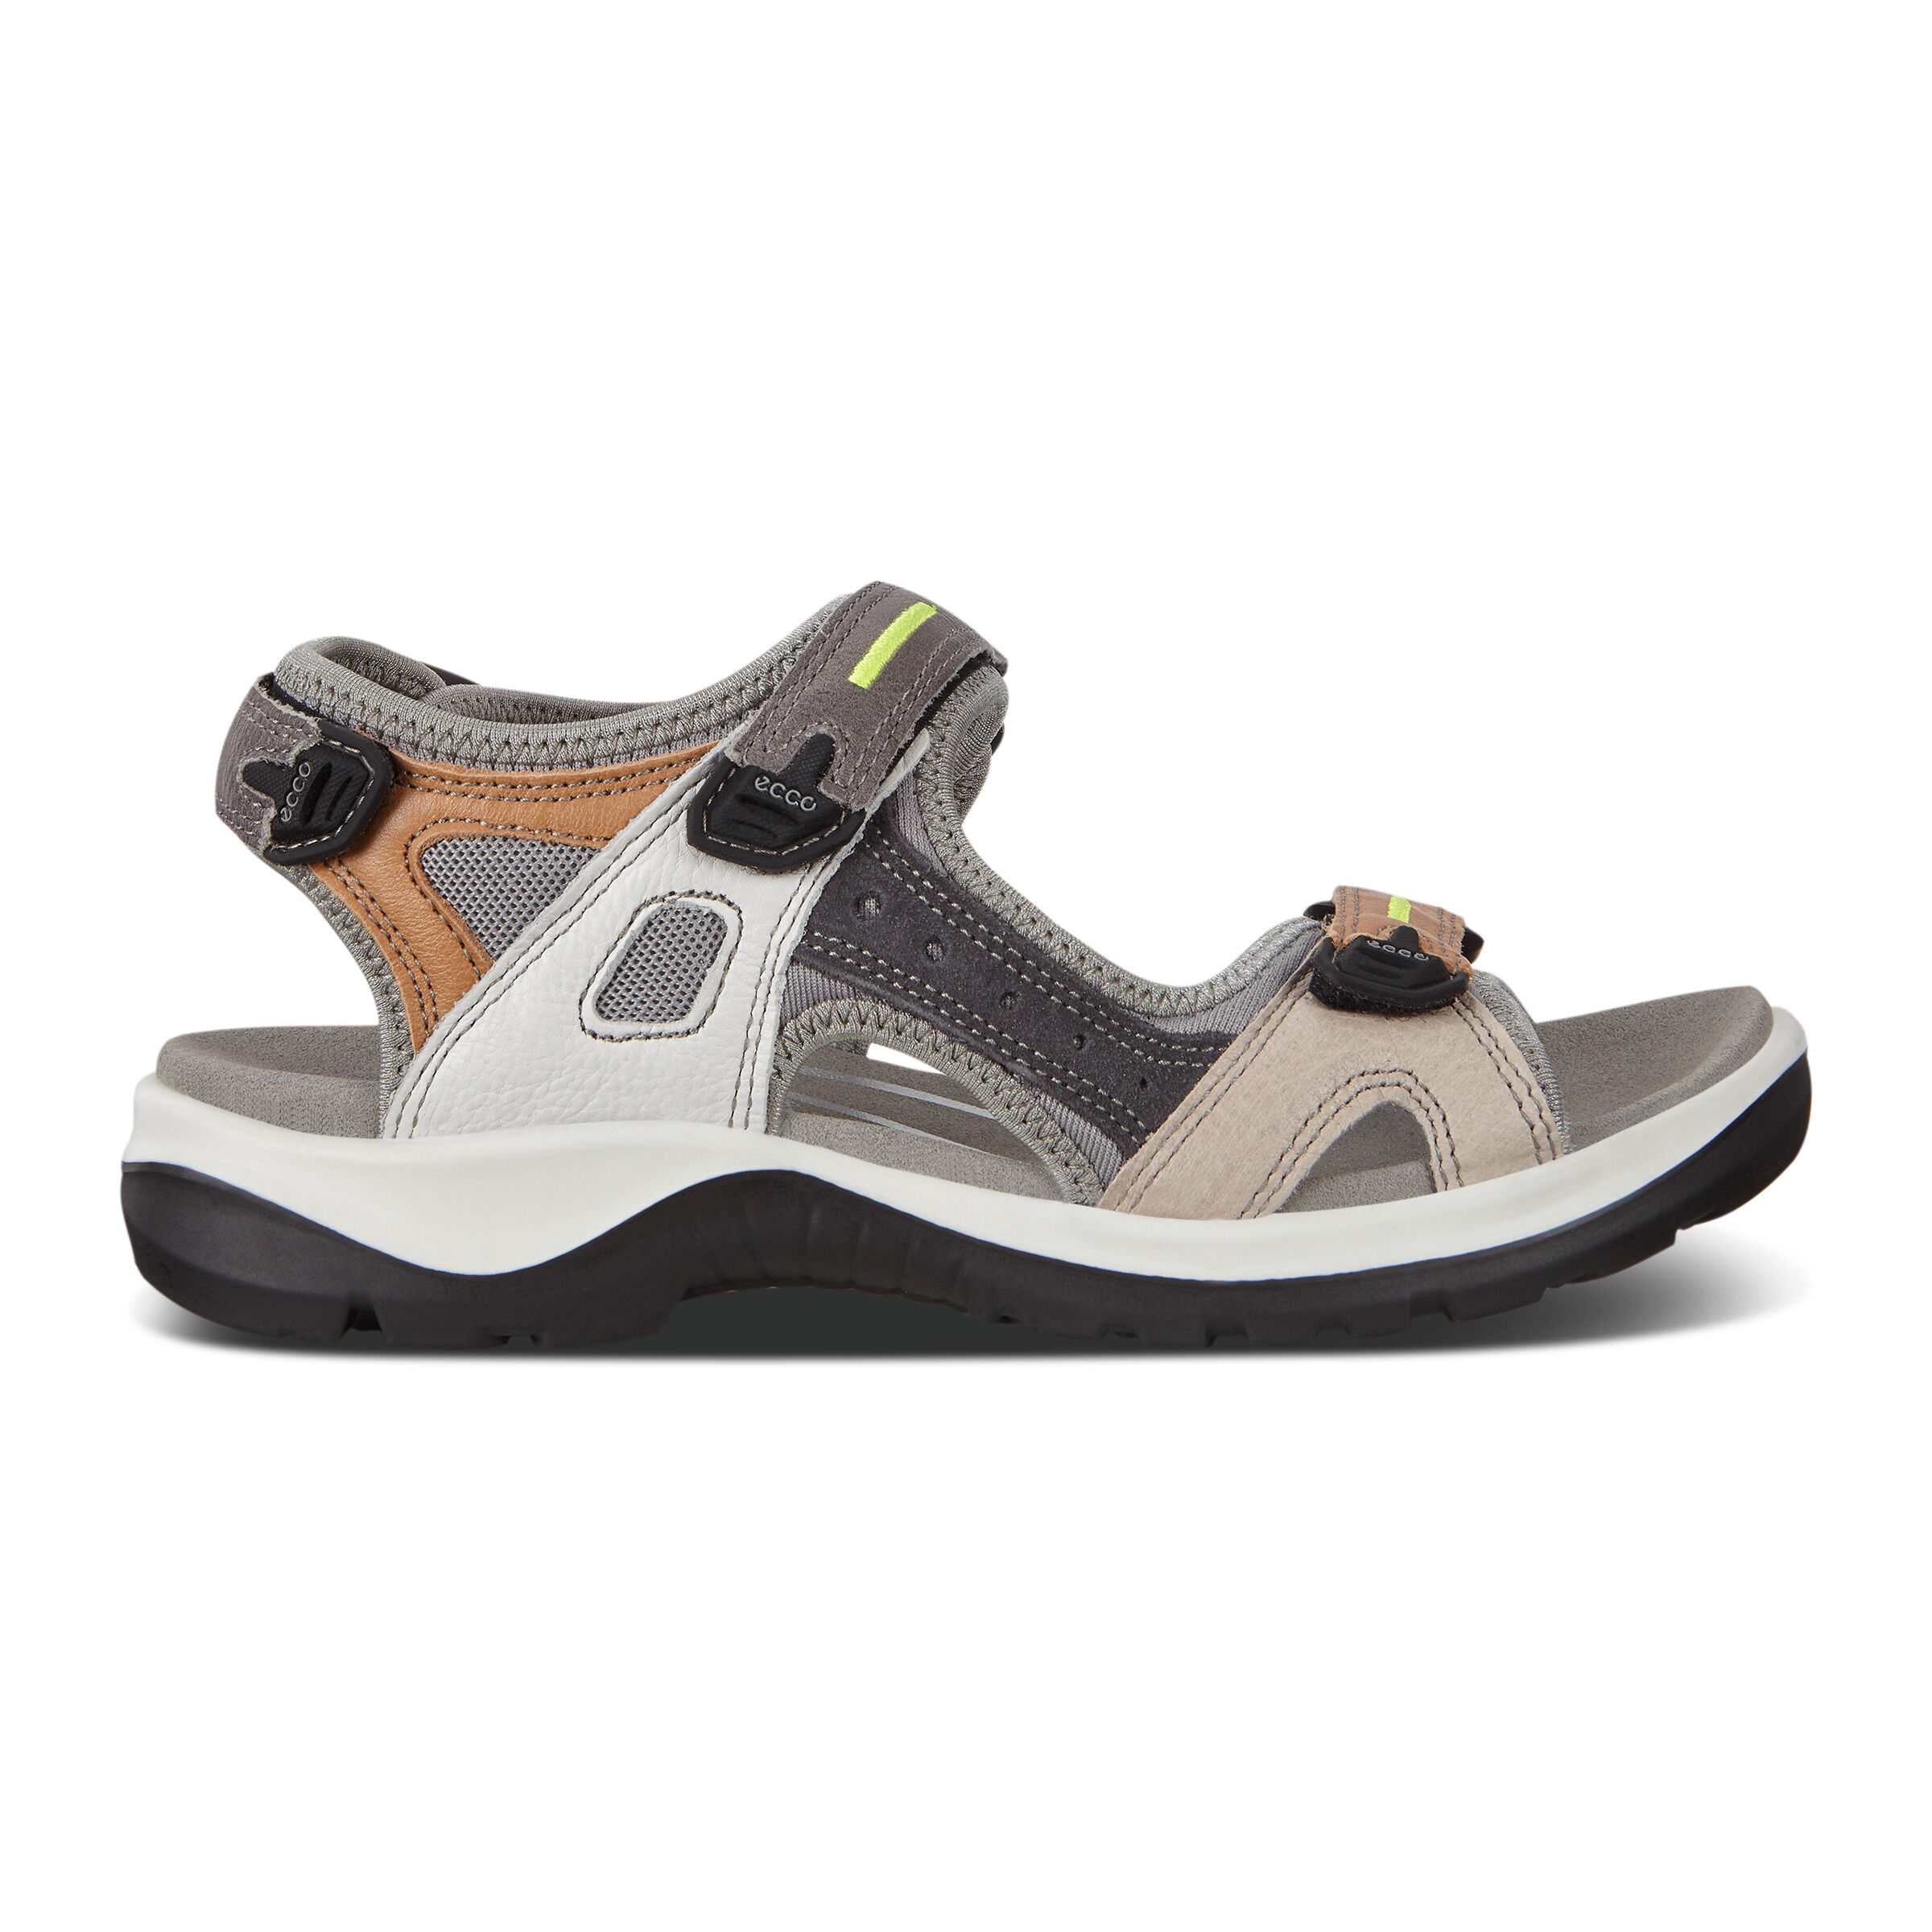 overtale Betydning I forhold ecco groove sandal sale,yasserchemicals.com